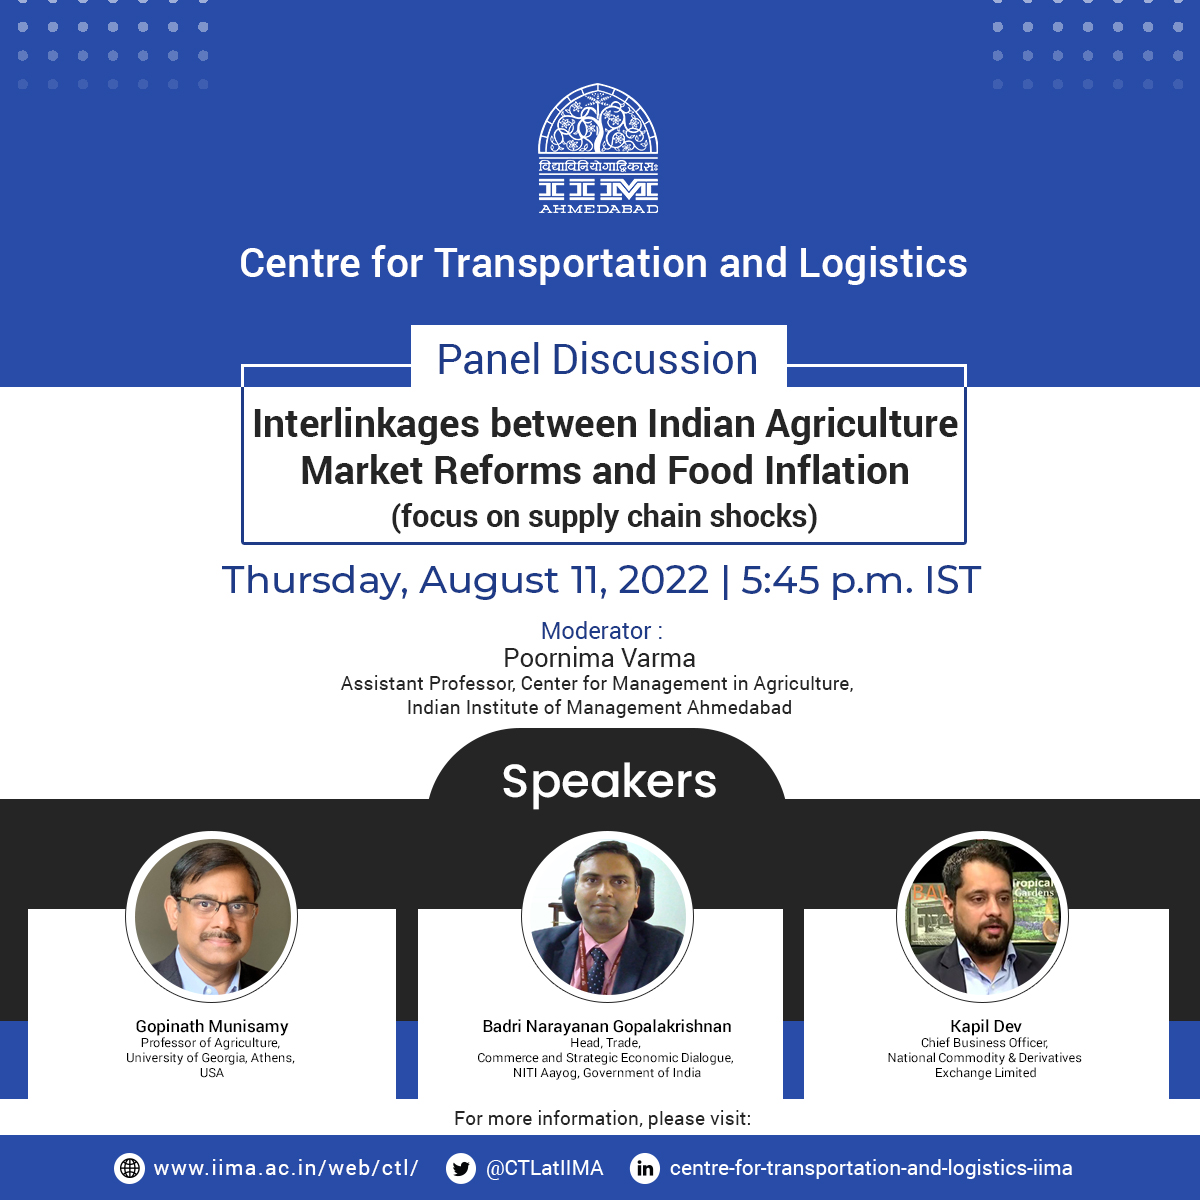 Interlinkages between Indian Agriculture Market Reforms and Food Inflation